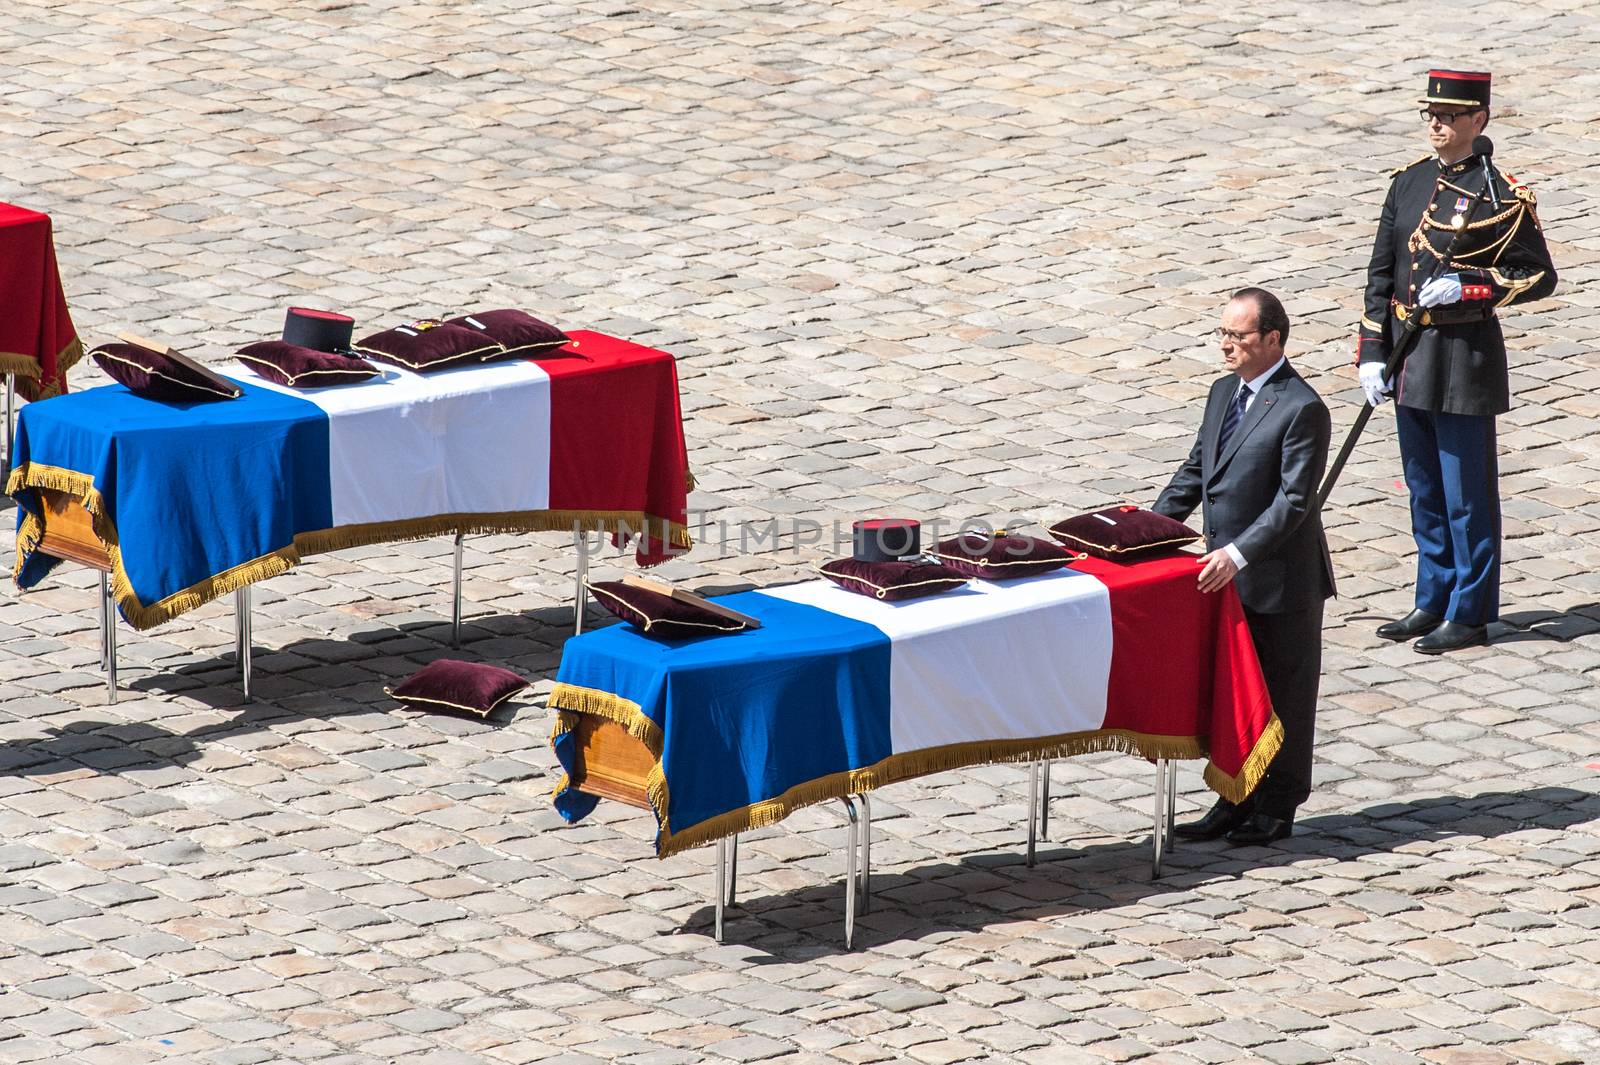 FRANCE, Paris : French President Francois Hollande pays his respect as he stands in front of one of the three coffins with the bodies of three French soldiers killed in service in Mali last week, during a solemn and national tribute ceremony at the Hotel des Invalides in Paris, on April 20, 2016.Three French peacekeeping soldiers died after their armoured car ran over a landmine in Mali, the French presidency said April 13, 2016. One soldier, Mickael Poo-Sing, was killed immediately in the blast on April 12, 2016 and President Francois Hollande learned with great sadness that two more soldiers had died in the west African country, a statement said. The car was leading a convoy of around 60 vehicles travelling to the northern desert town of Tessalit when it hit the mine, according to the French defence ministry. The troops were part of Operation Barkhane, under which France has some 3,500 soldiers deployed across five countries in the Sahel region, south of the Sahara desert, to combat the jihadist insurgency raging there.